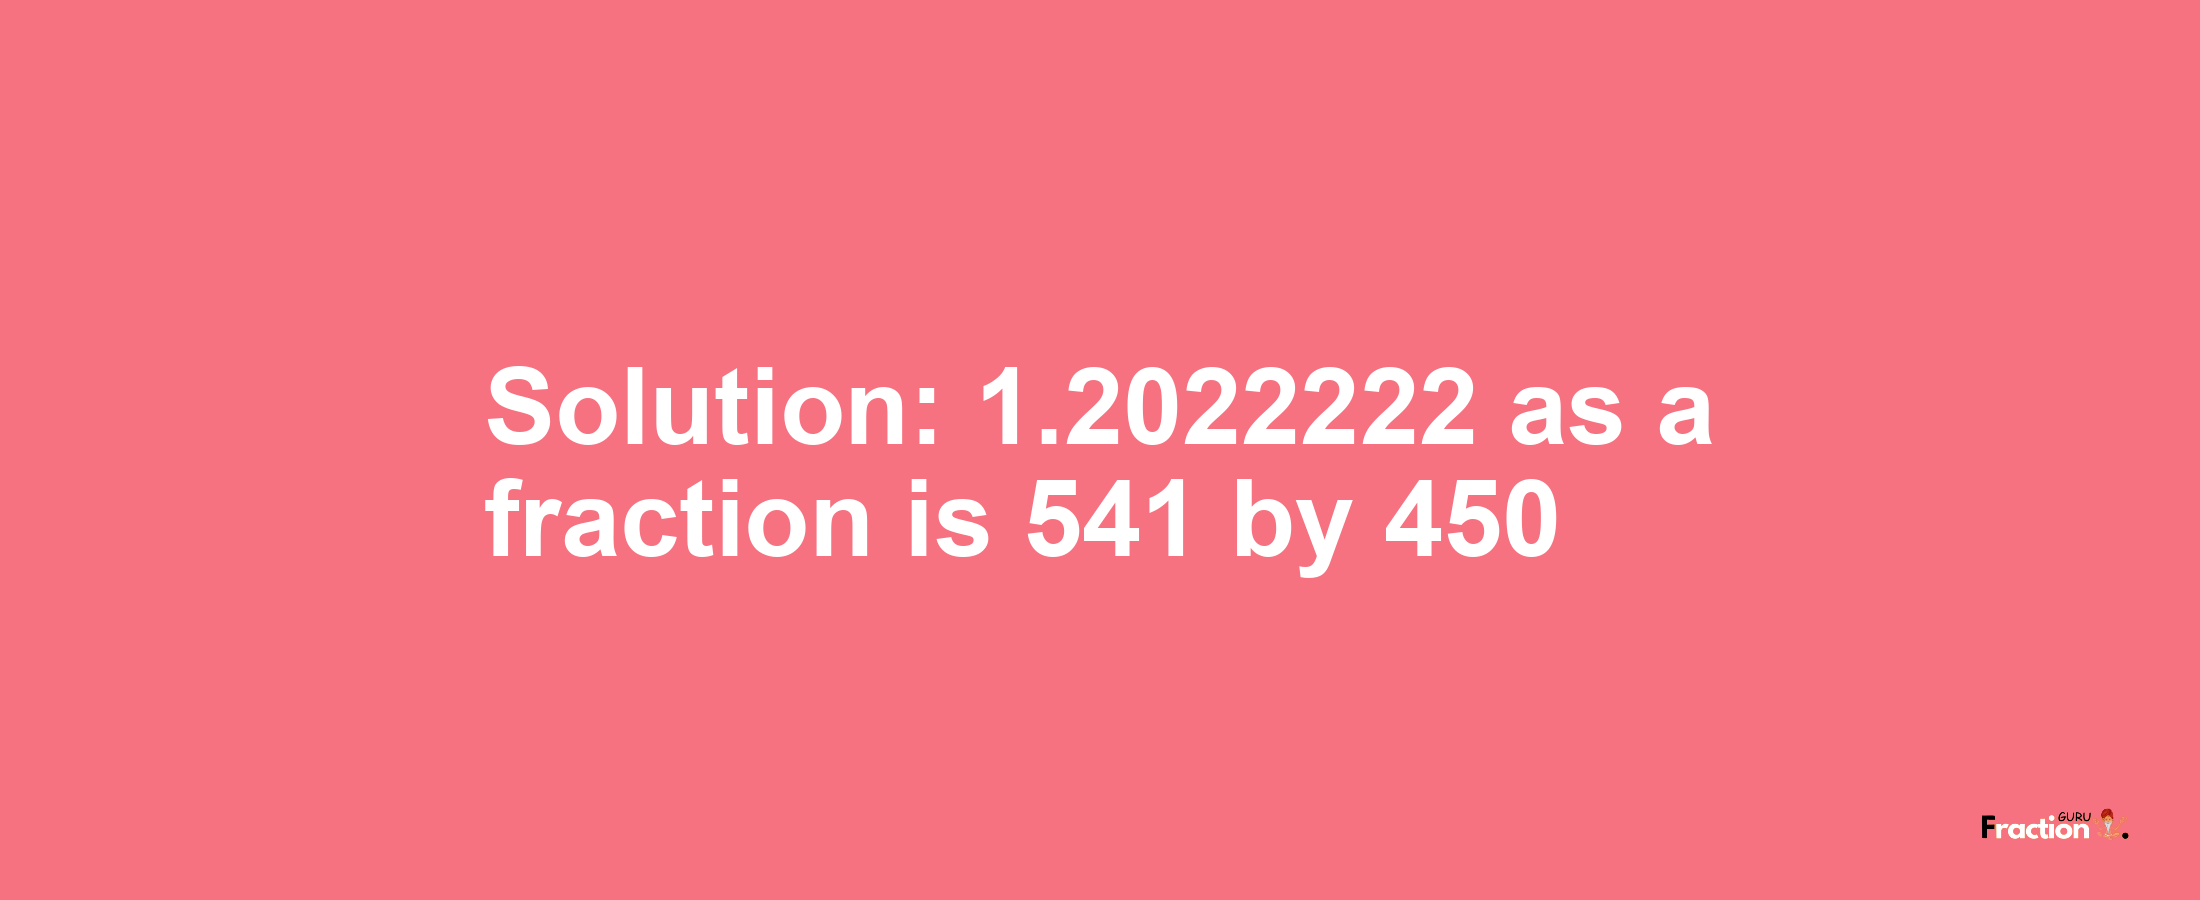 Solution:1.2022222 as a fraction is 541/450